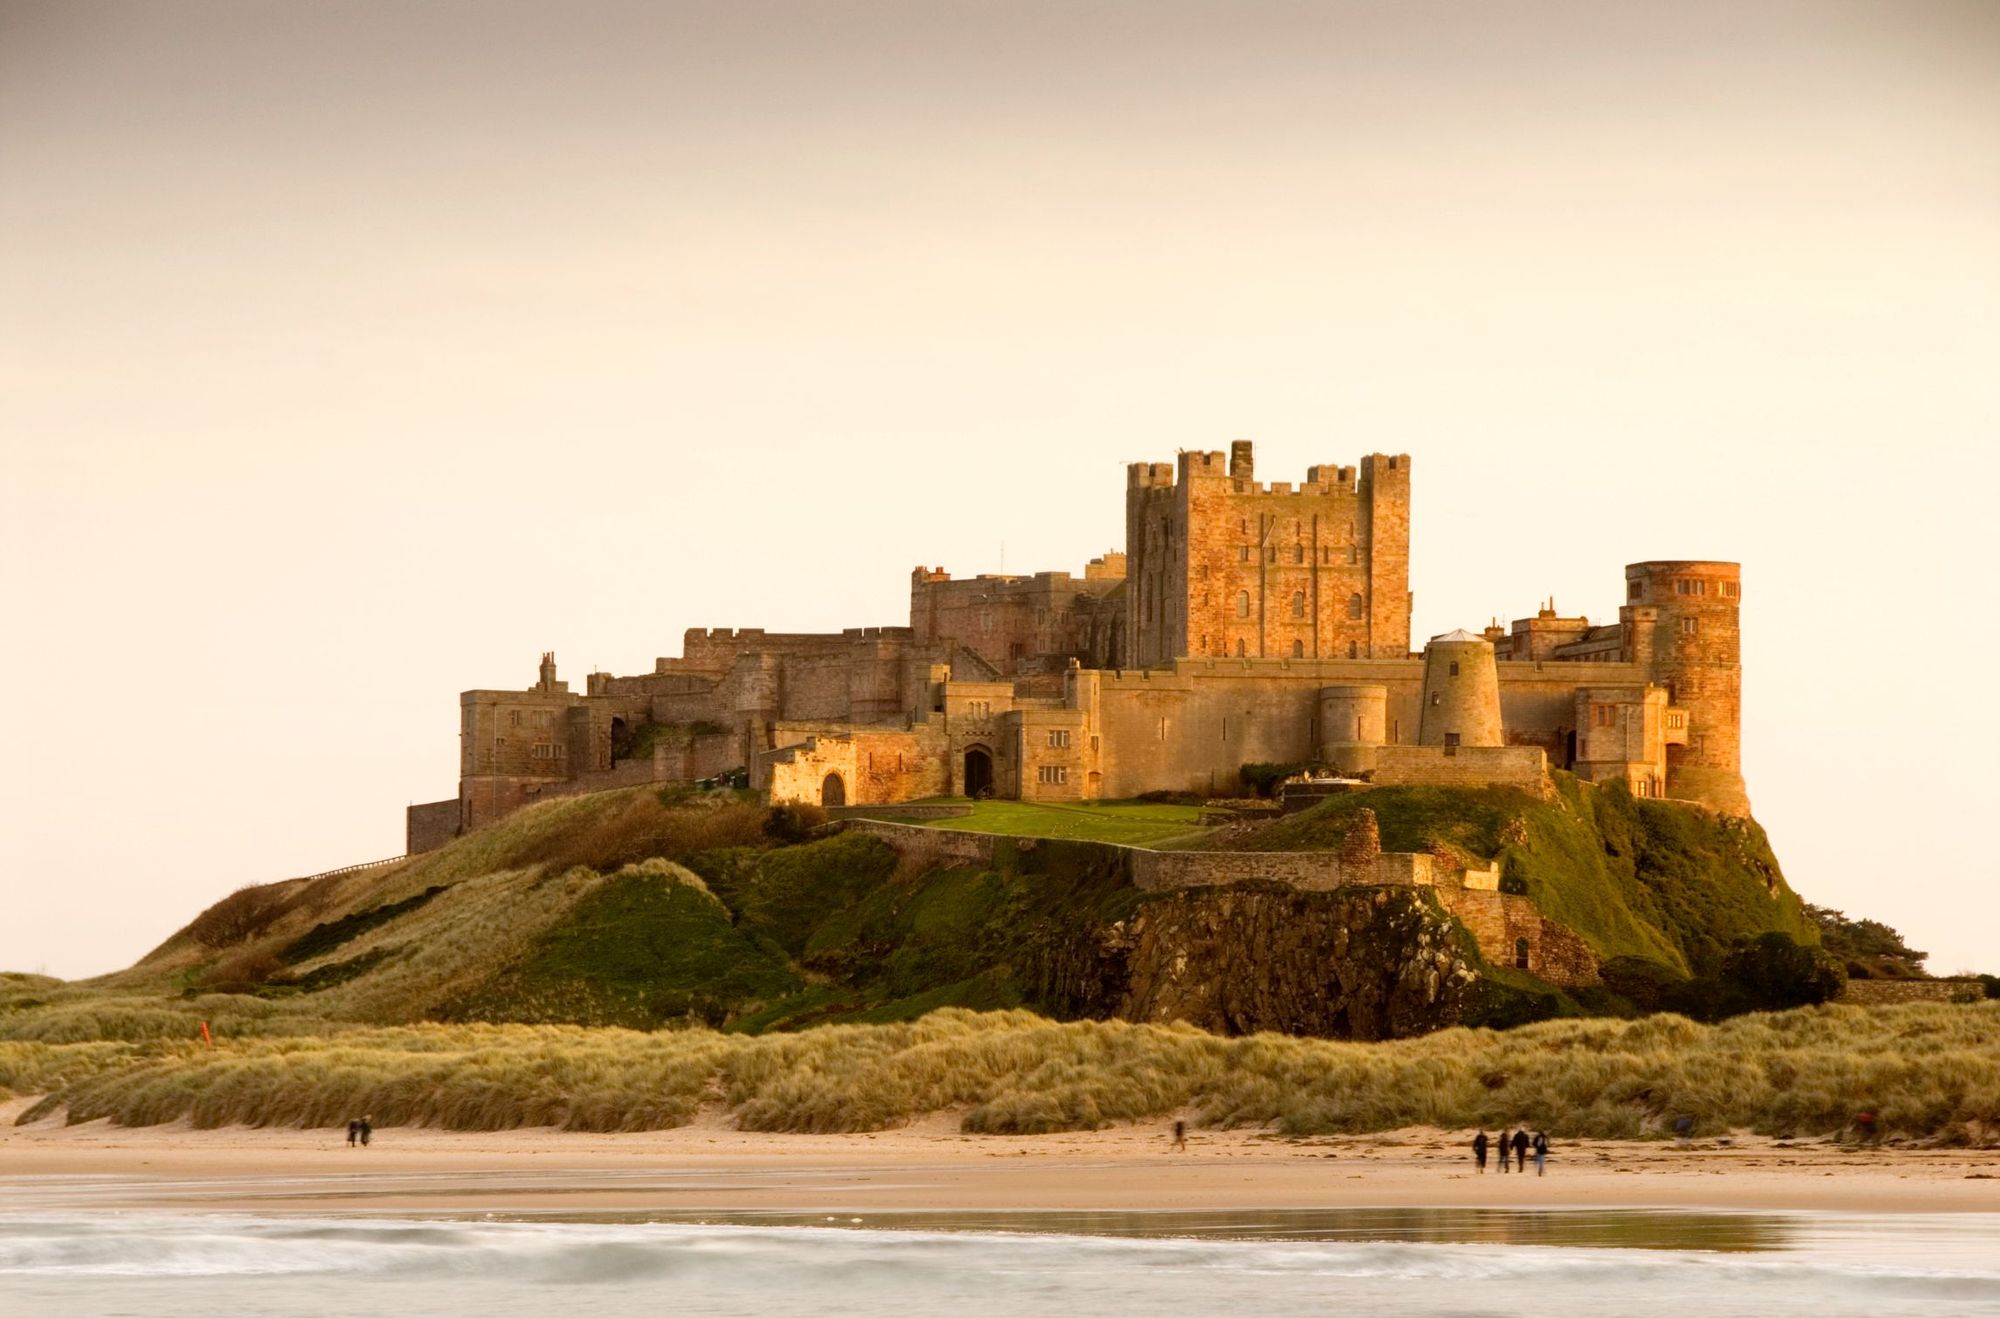 Bamburgh Castle, looking out over the east coast of England. Photo: Getty